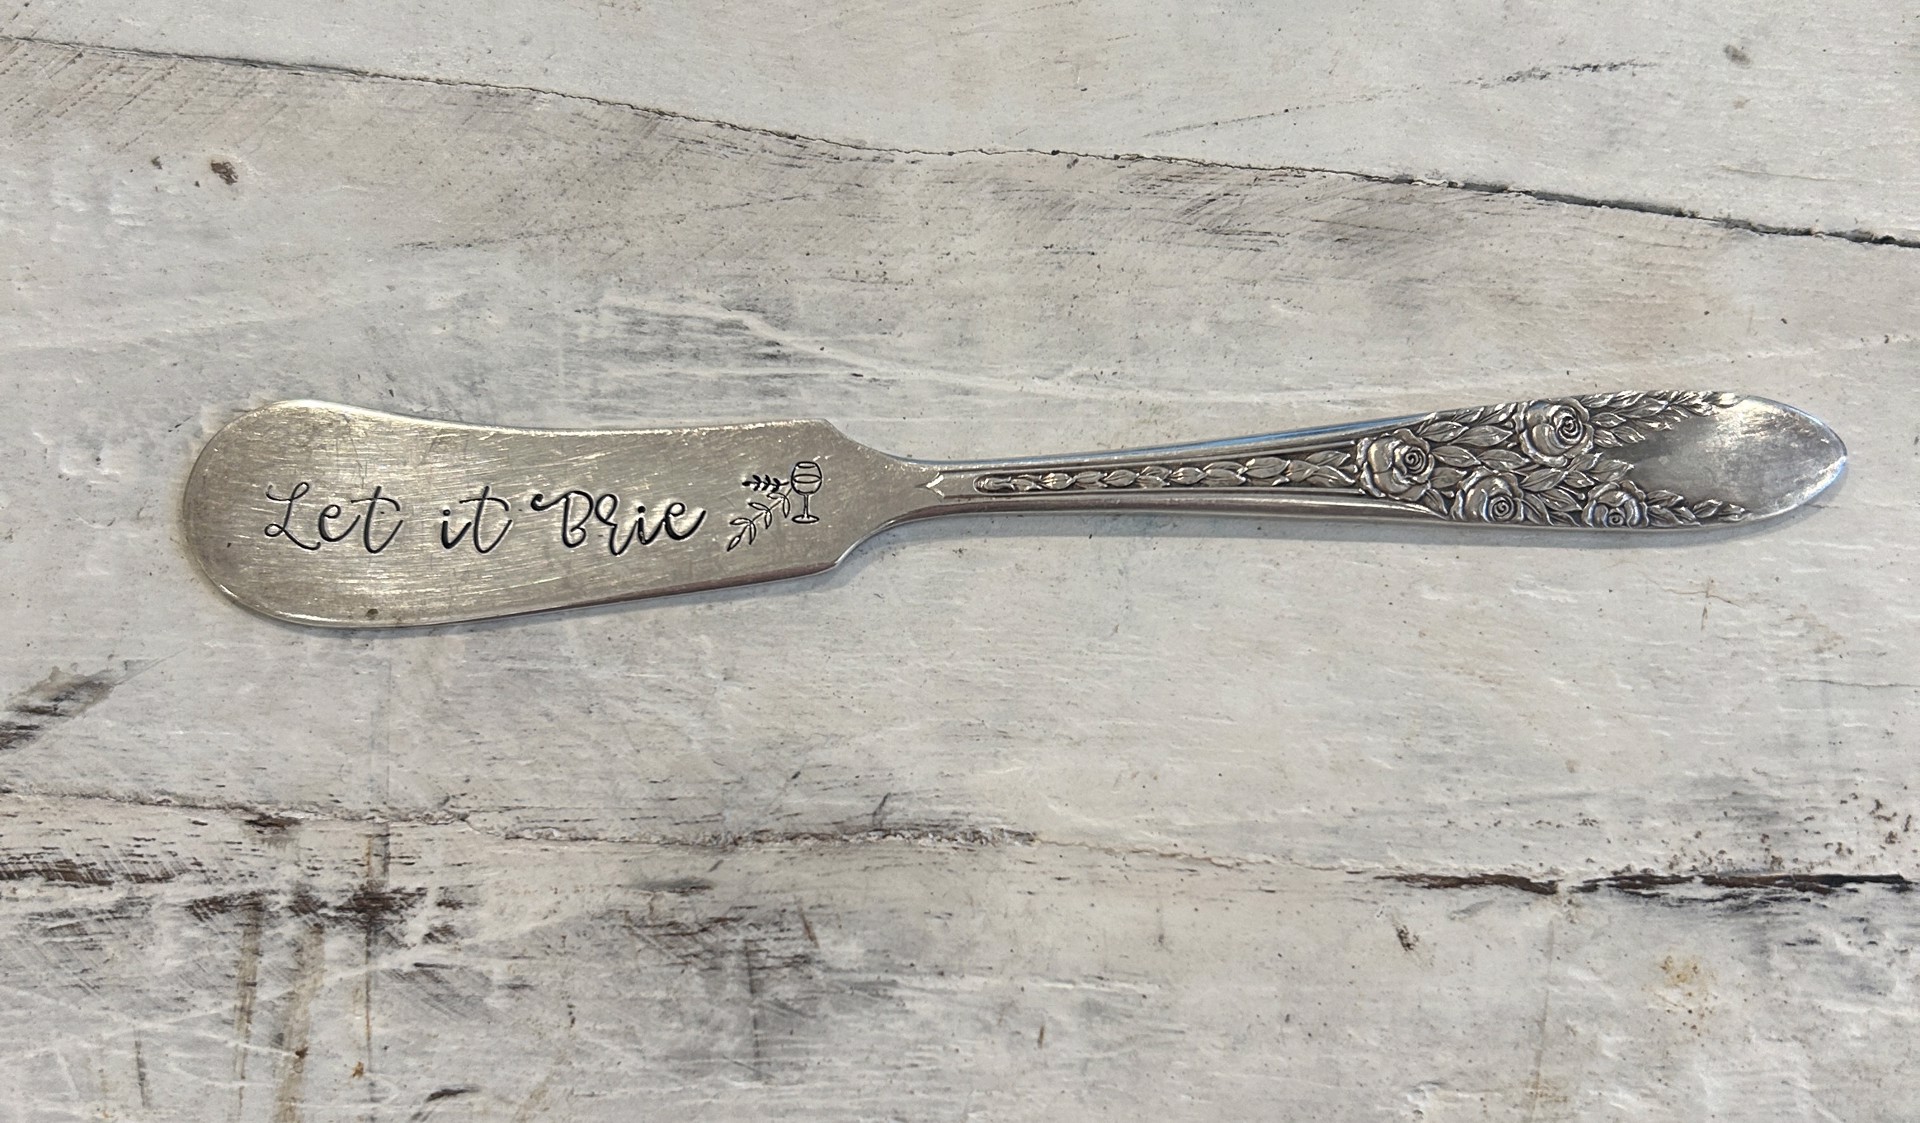 Holiday Vintage Cheese Knife | Let it Brie by Sassy Barn